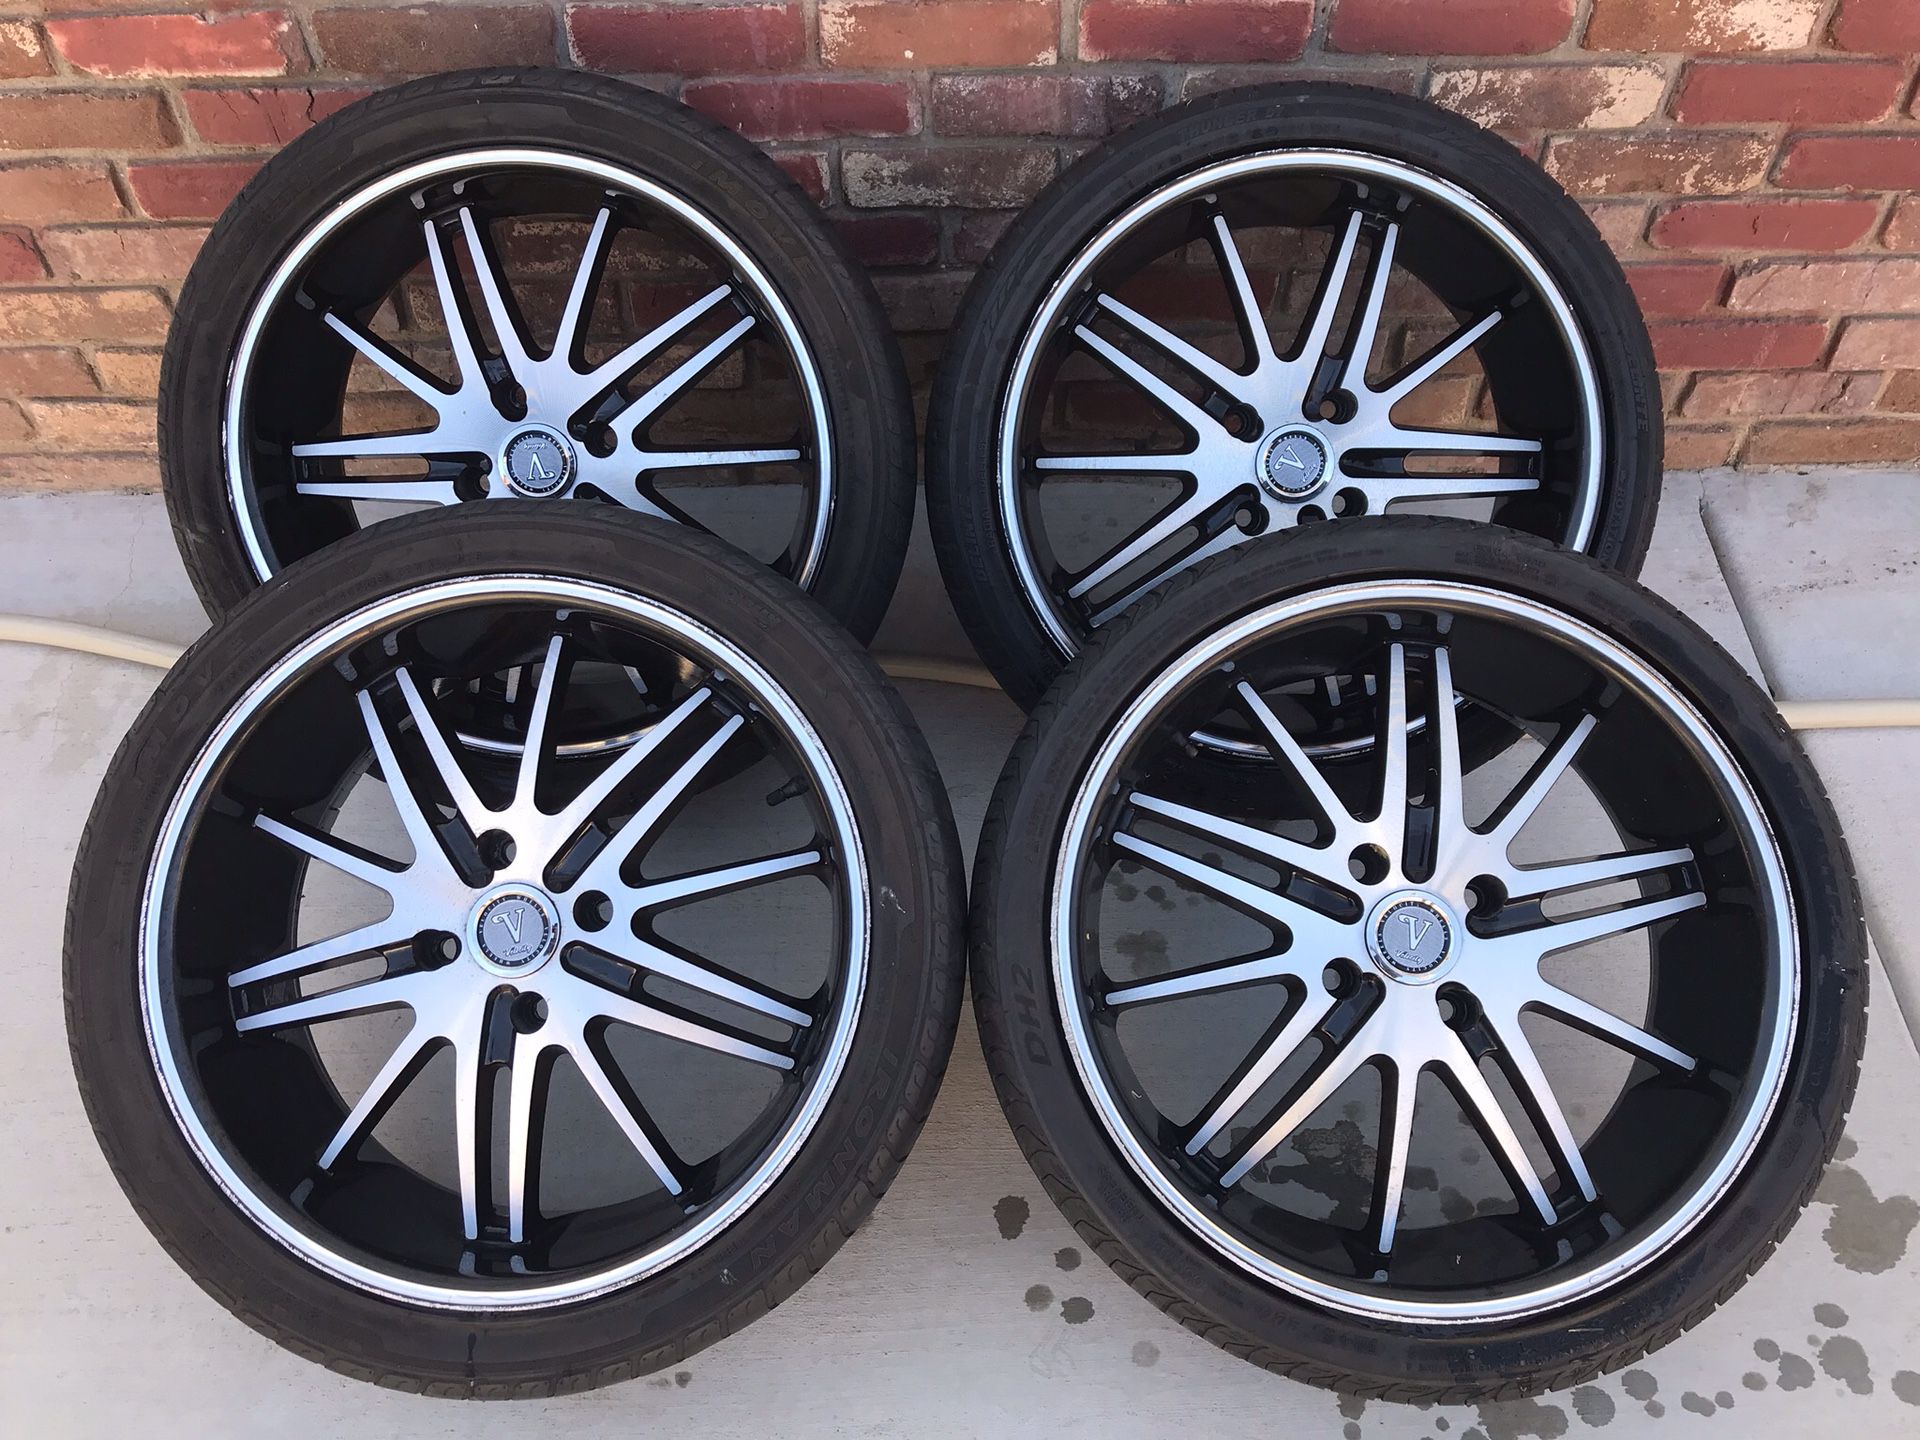 18” Black Machined Velocity Rims with Tires